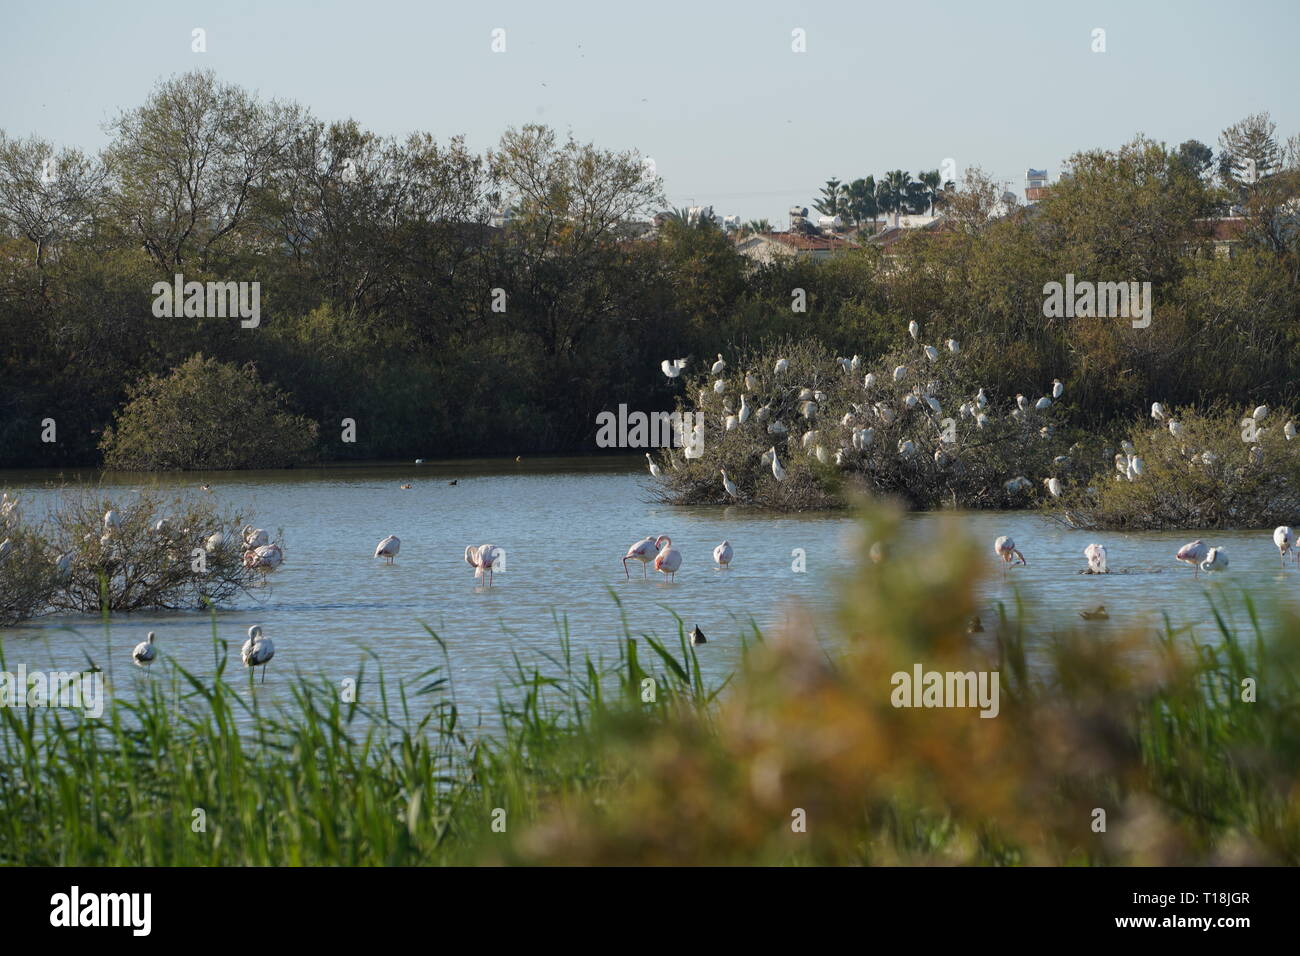 Pink flamingo use Cyprus as one of the important migratory passages. Among them are 12,000 flamingos (Phoenicopterus ruber) feeding on brine shrimp. Stock Photo